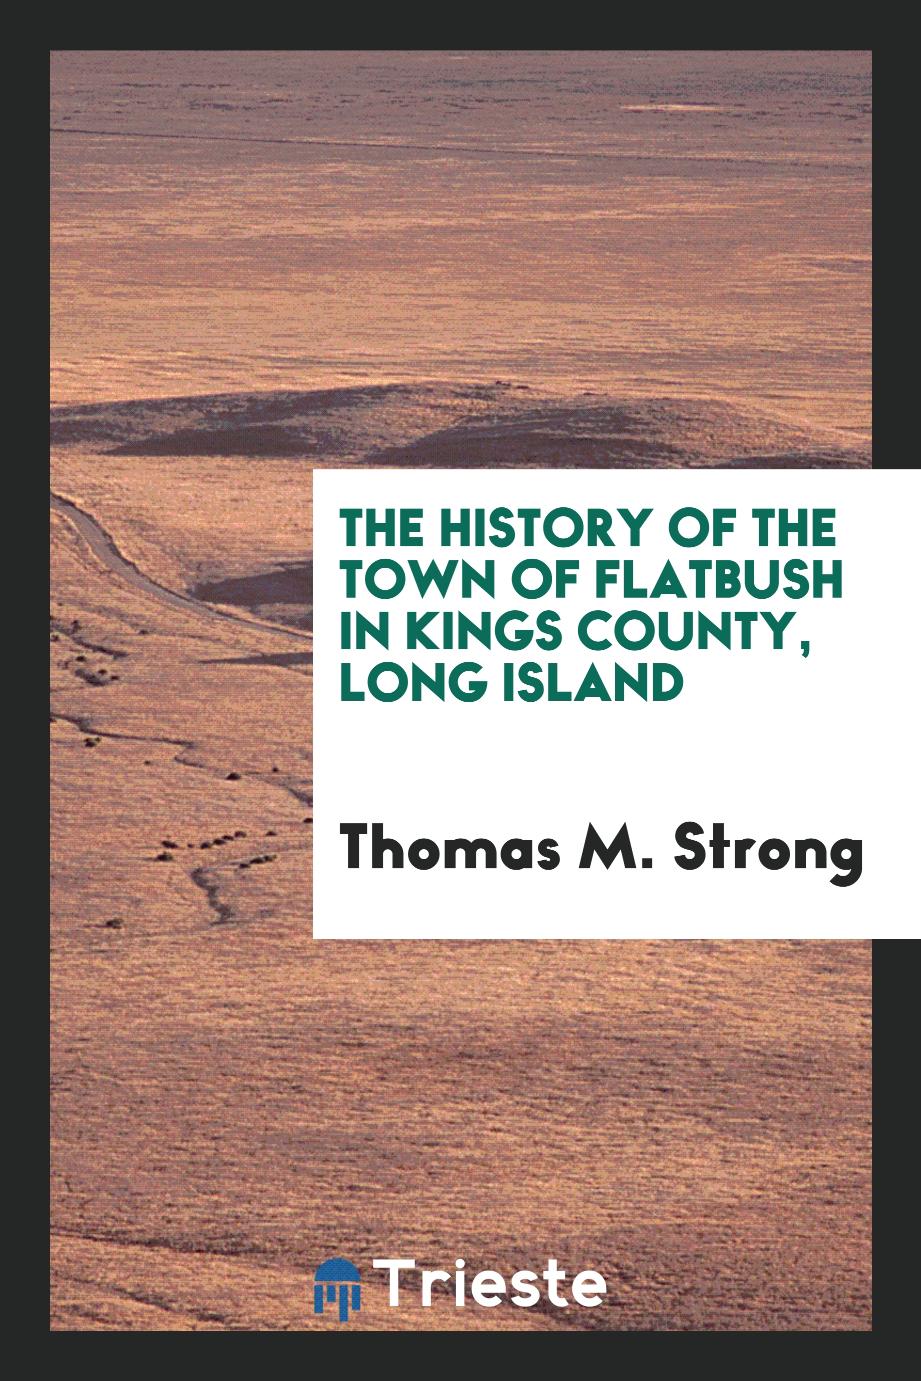 The history of the town of Flatbush in Kings County, Long Island